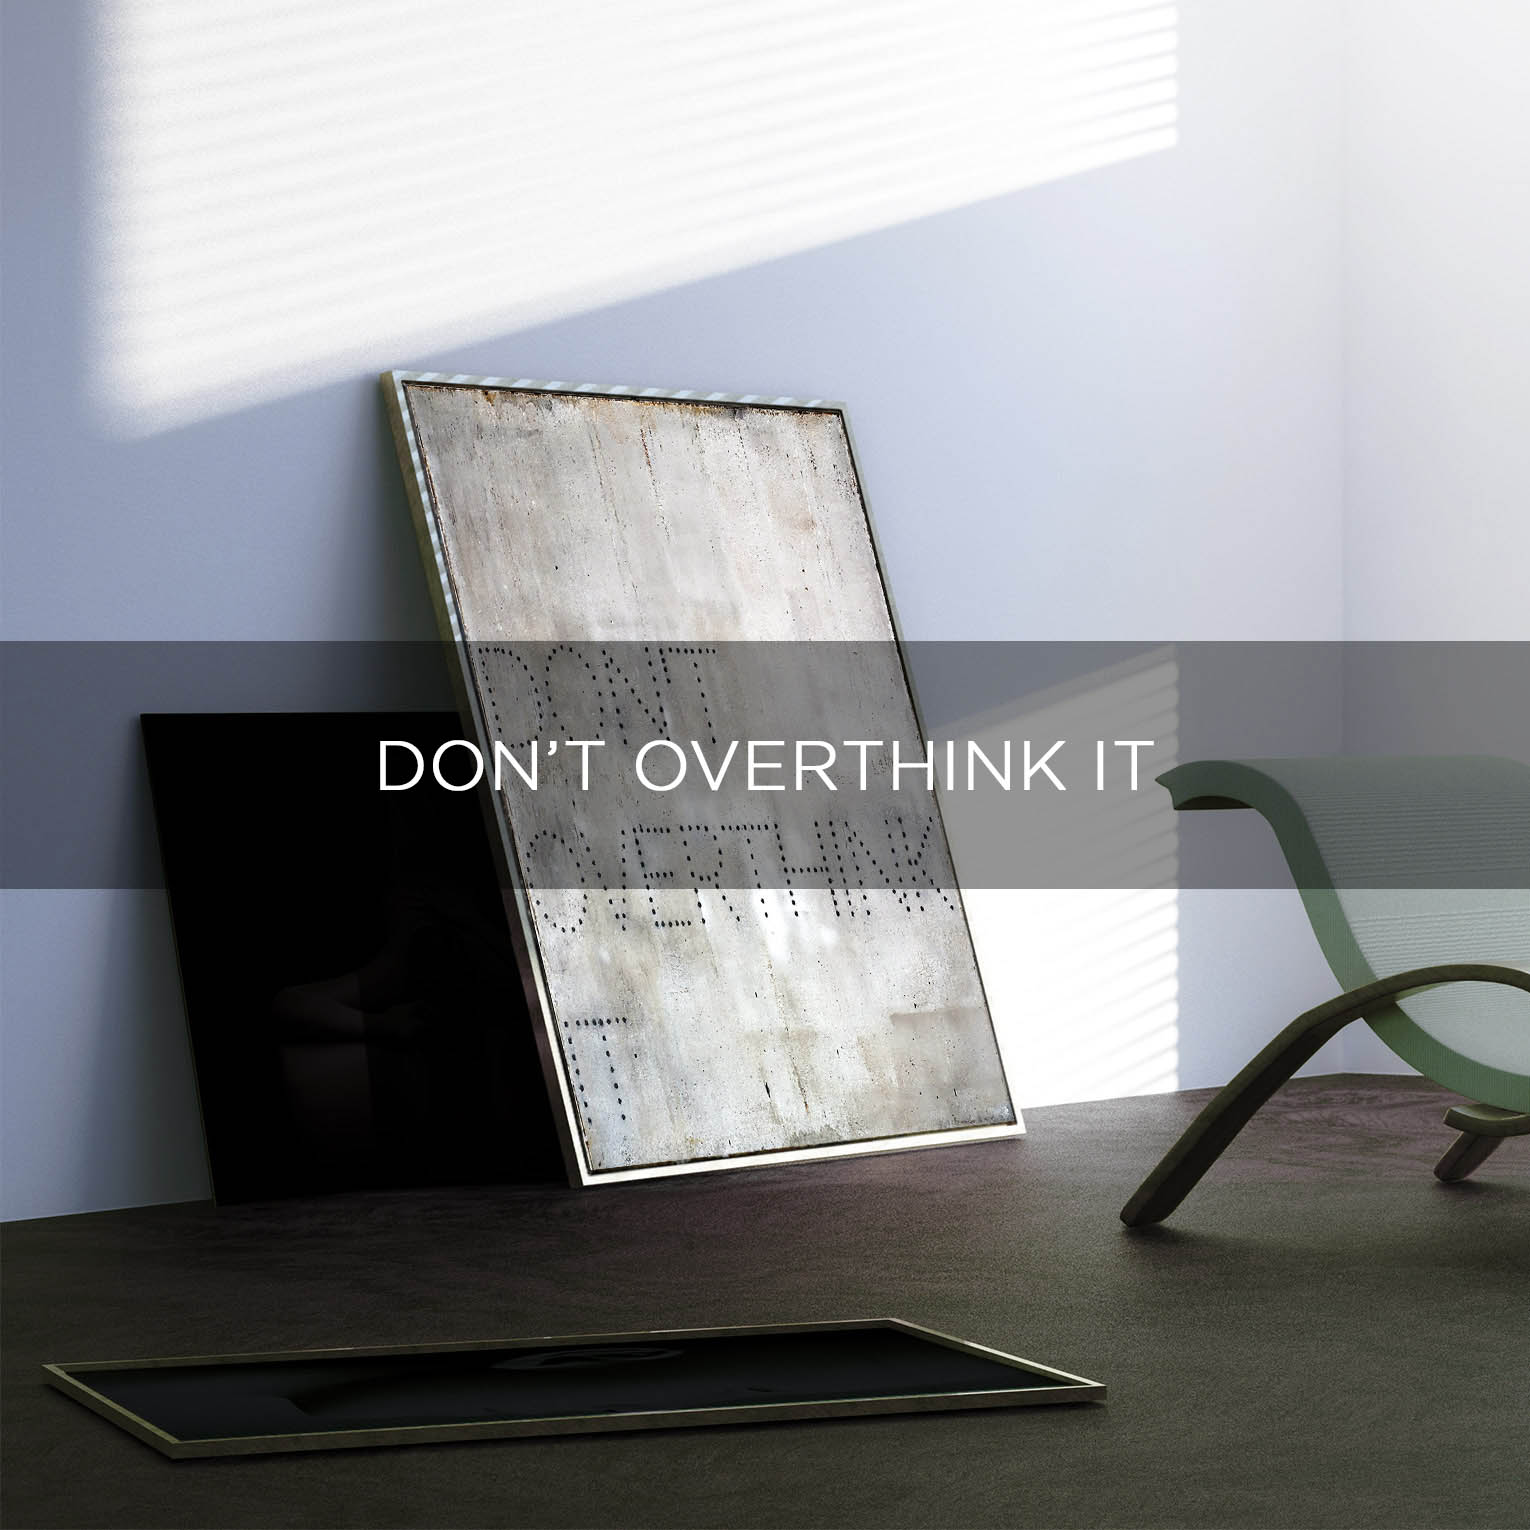 DON'T OVERTHINK IT